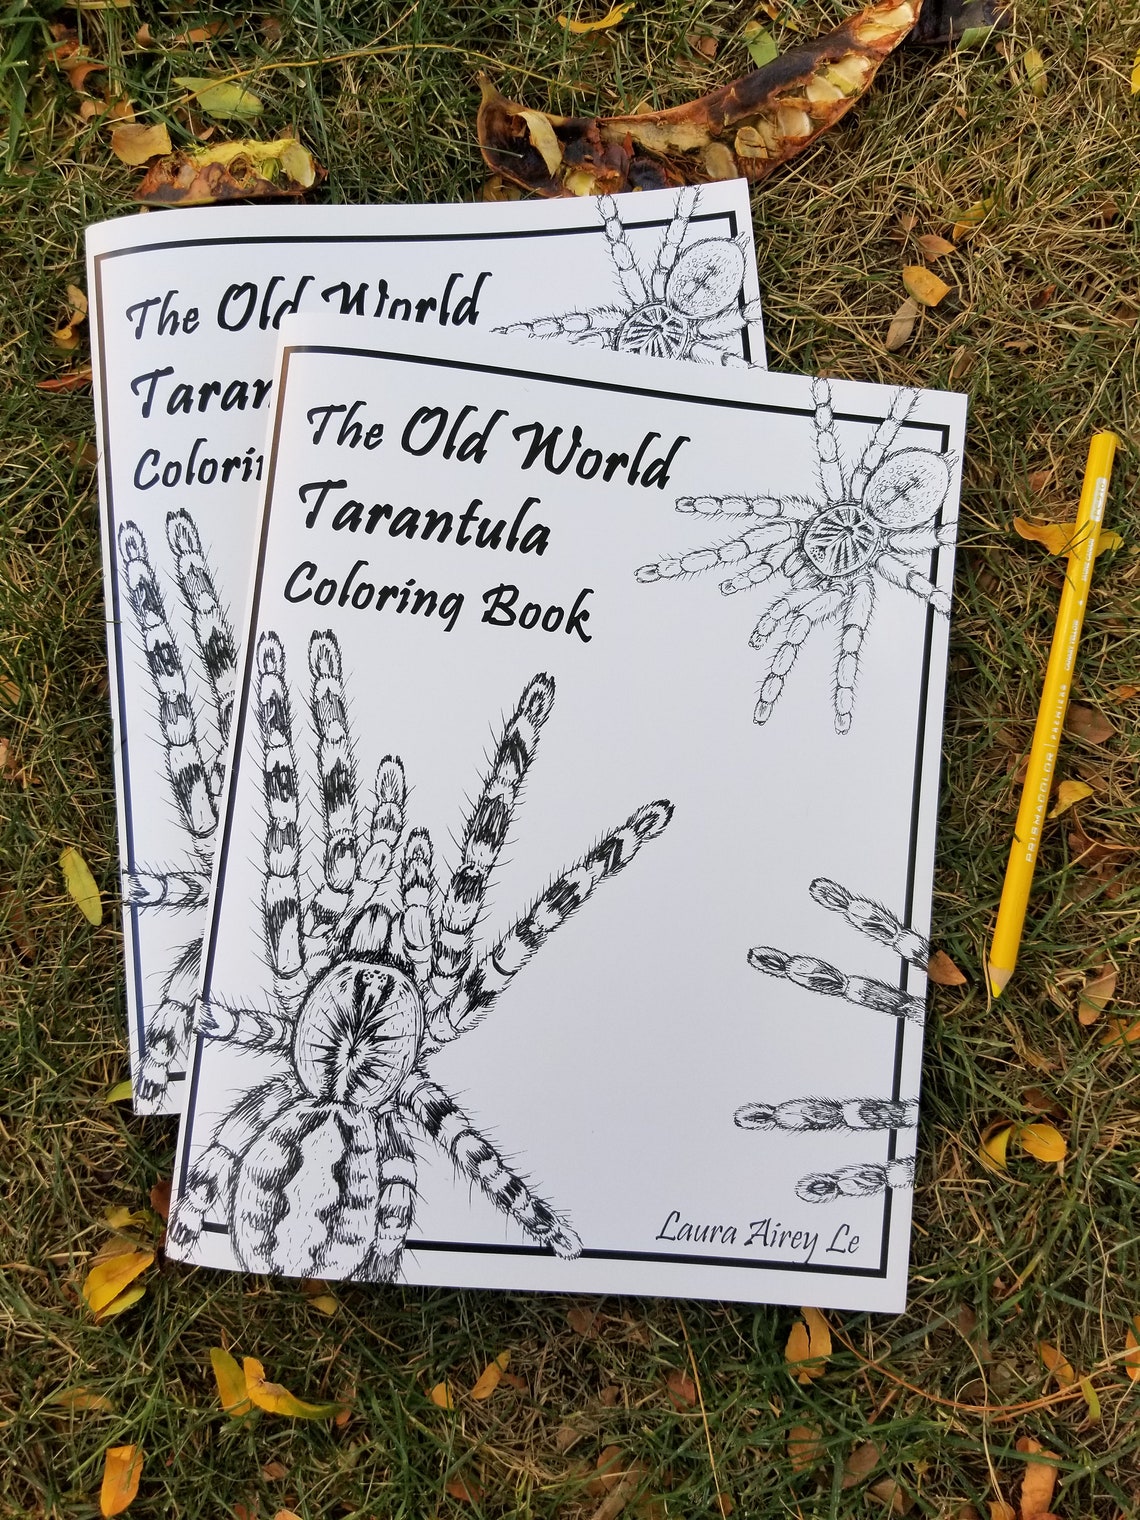 Buggy book review âthe old world tarantula coloring bookâ by laura airey le â dave the bug guy